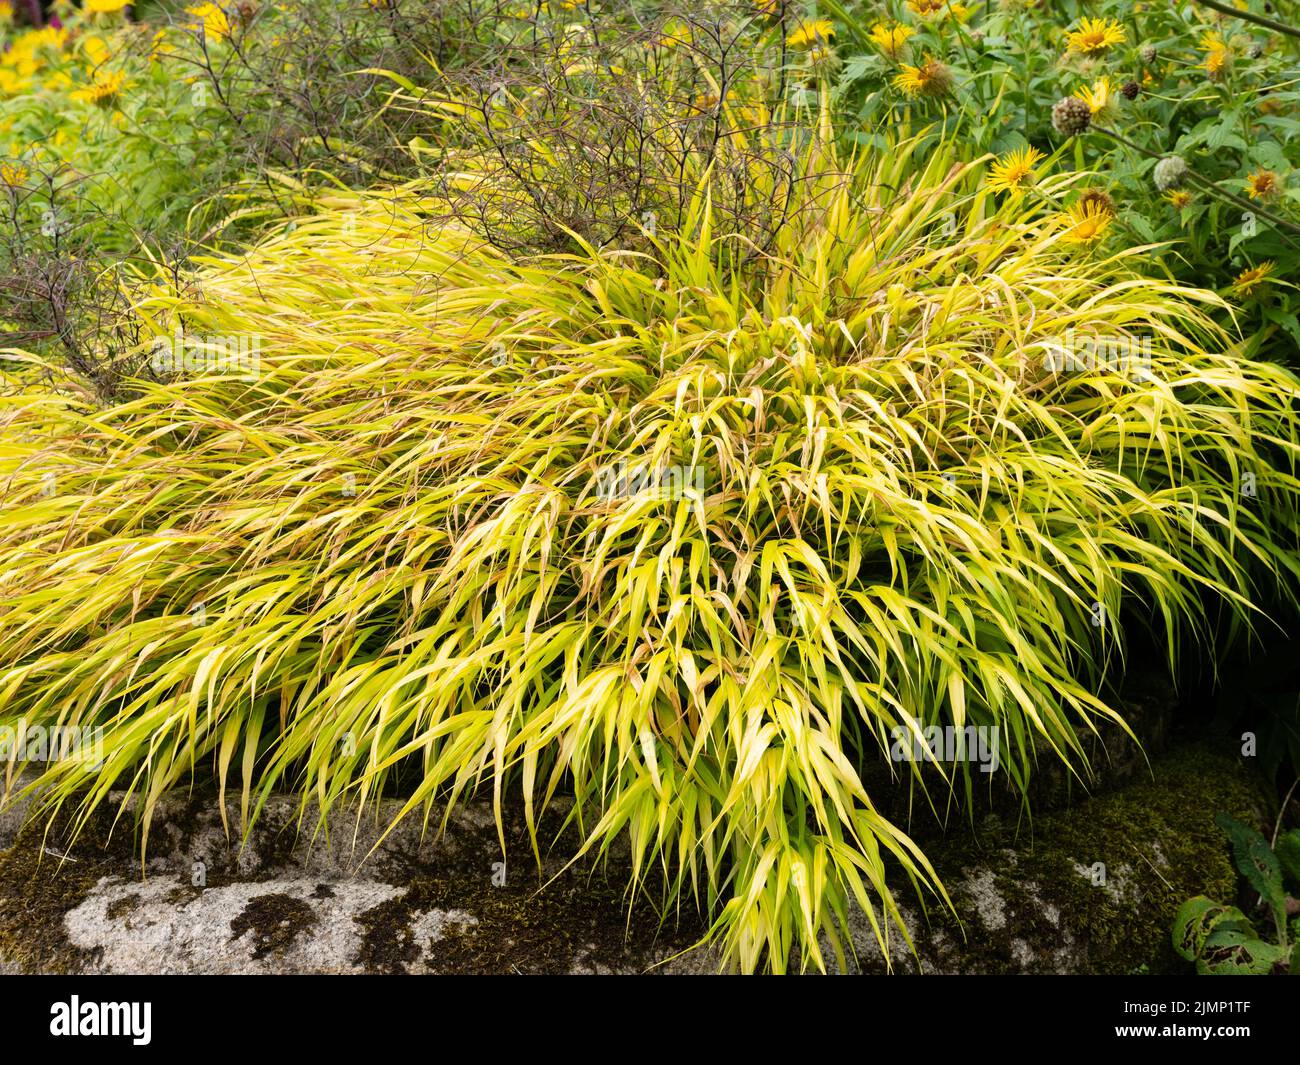 Flowing cascade of golden foliage of the hardy Japanese forest grass, Hakonechloa macra 'All Gold' Stock Photo